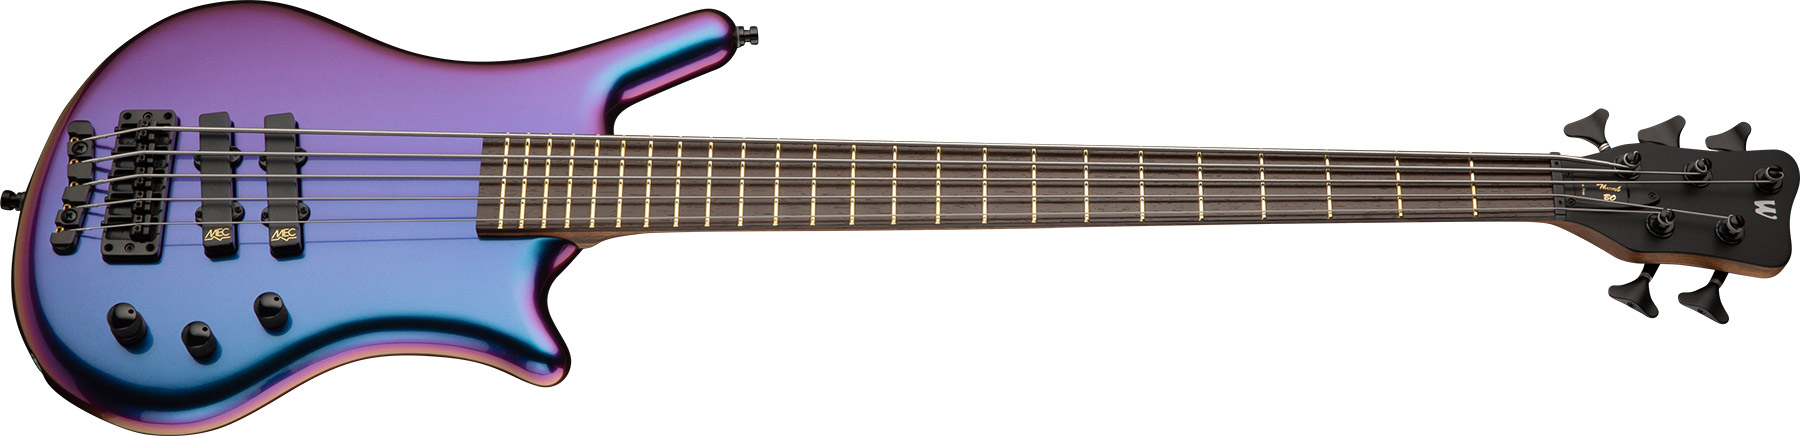 Warwick Custom Shop Thumb Bo 5c Pro Gps All Active Wen - Special Flip Flop - Solid body electric bass - Variation 1